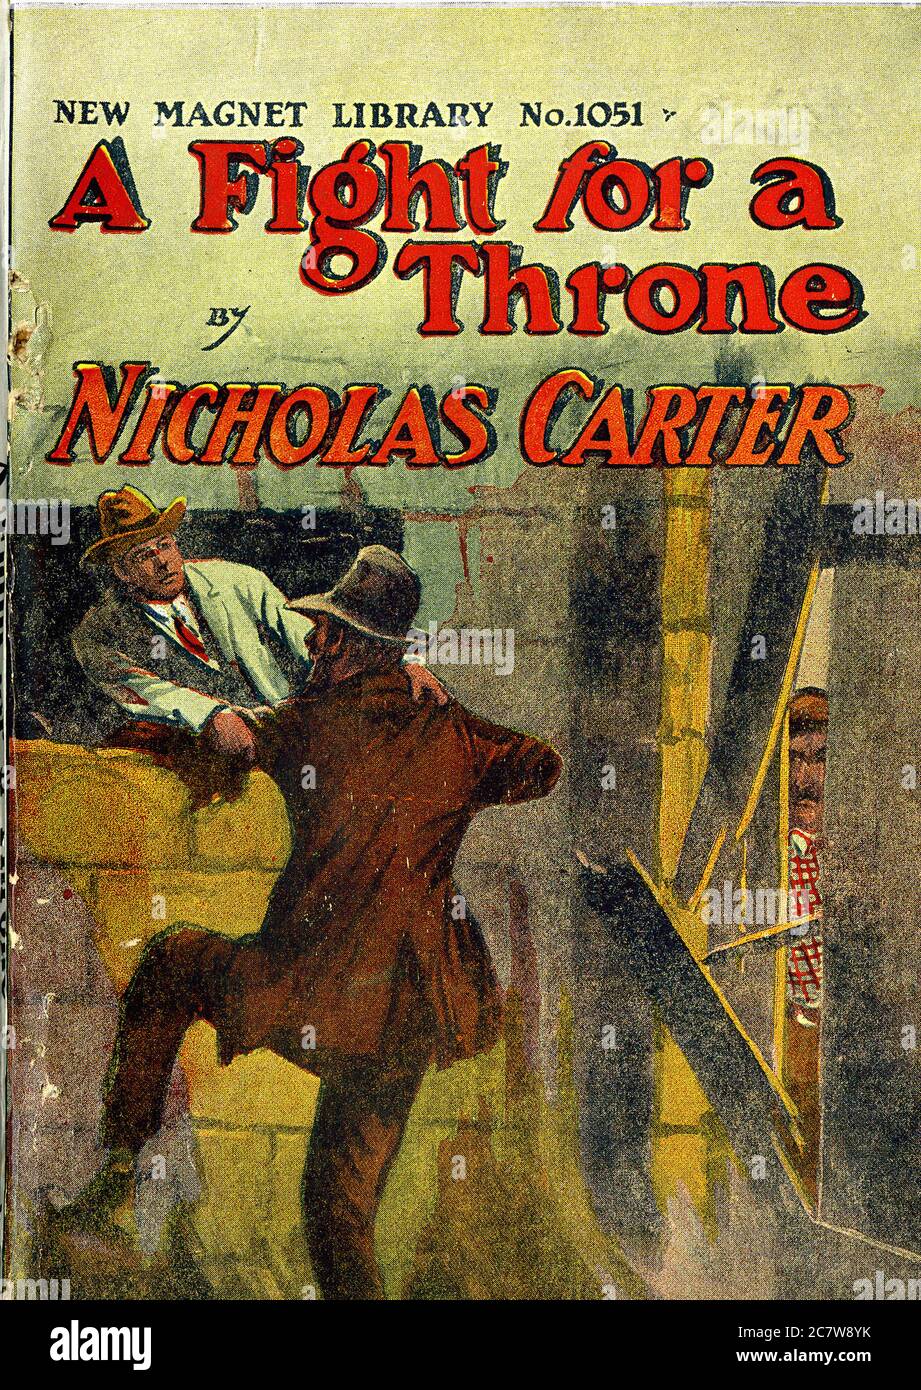 Nicholas Carter - A Fight for a Throne - New Magnet Library - Vintage Pulp Literary Stock Photo